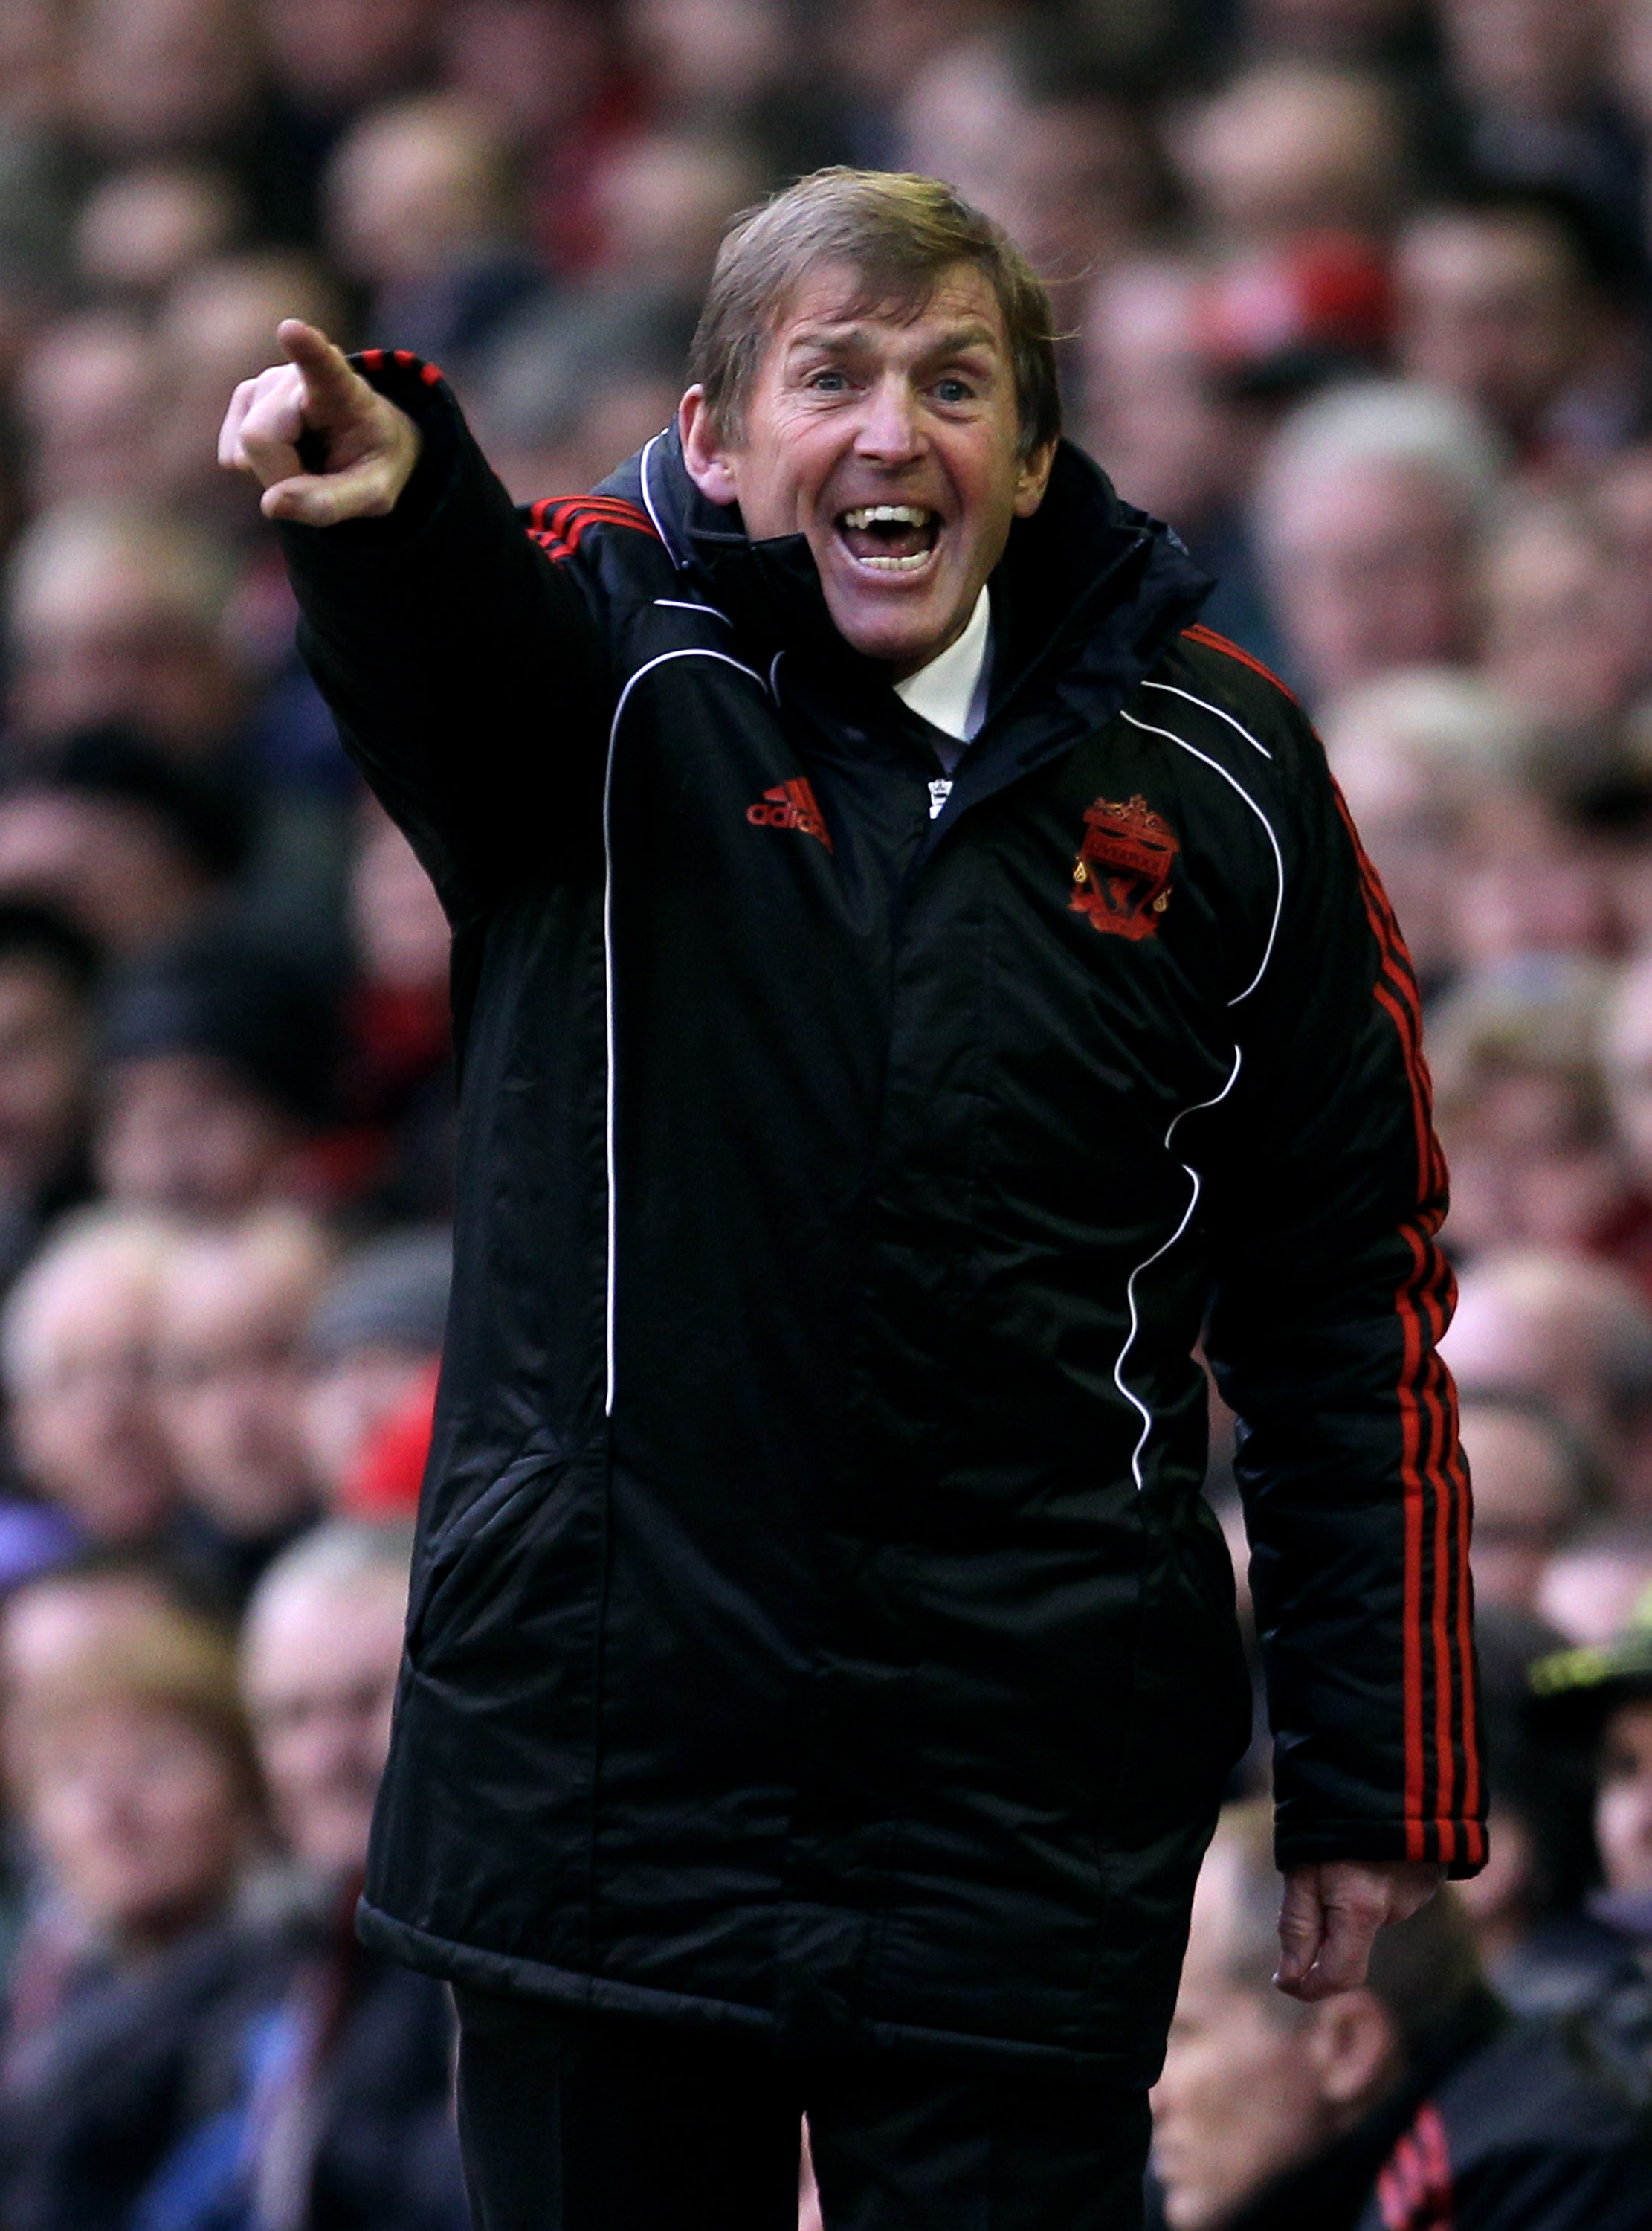 LIVERPOOL, ENGLAND - JANUARY 16:  Liverpool Manager Kenny Dalglish issues instructions during the Barclays Premier League match between Liverpool and Everton at Anfield on January 16, 2011 in Liverpool, England.  (Photo by Alex Livesey/Getty Images)